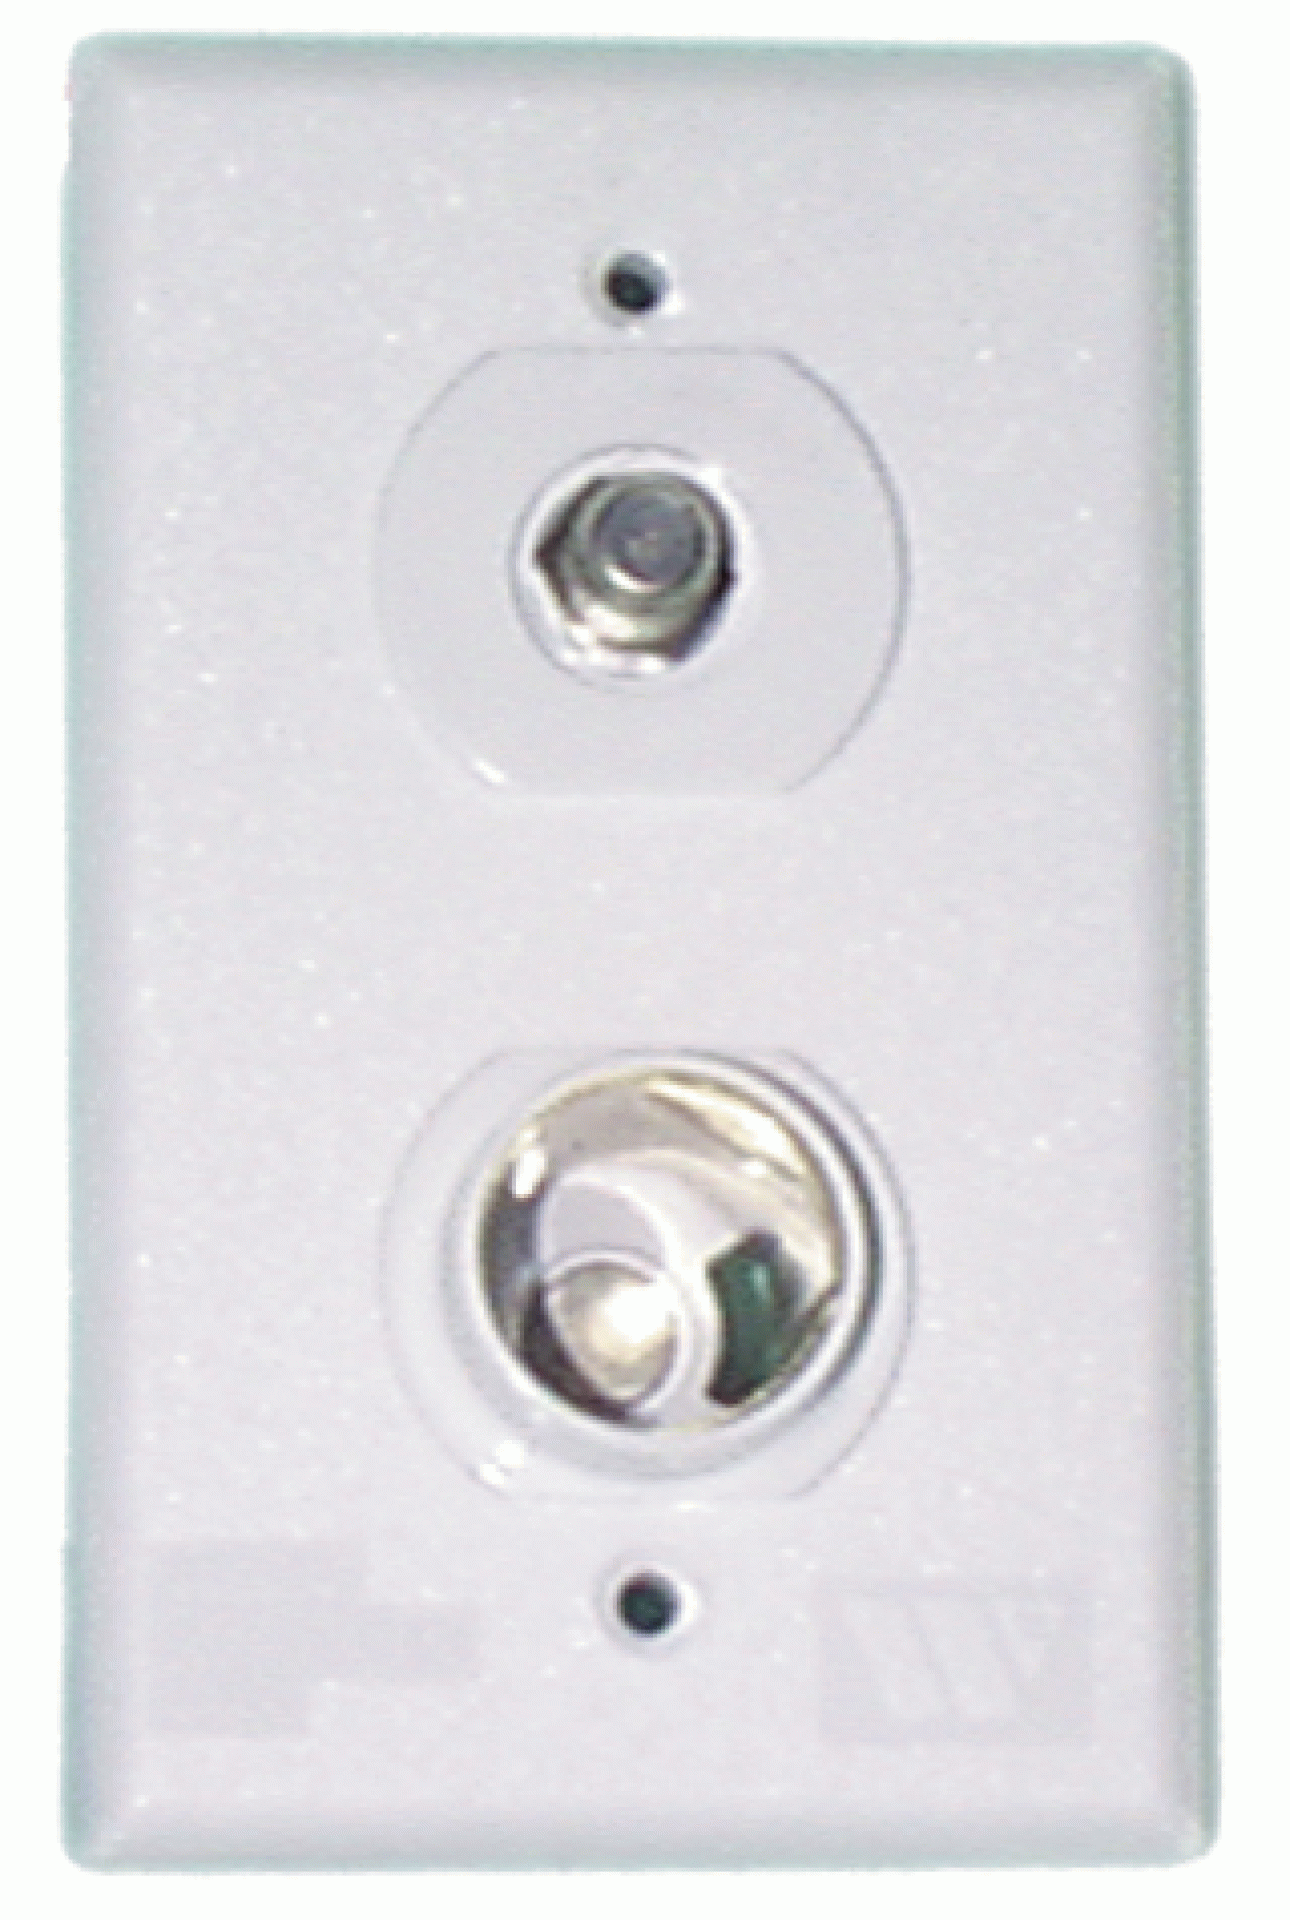 WINEGARD COMPANY | TG-7341 | TV OUTLET/RECEPTACLE MODEL 7721